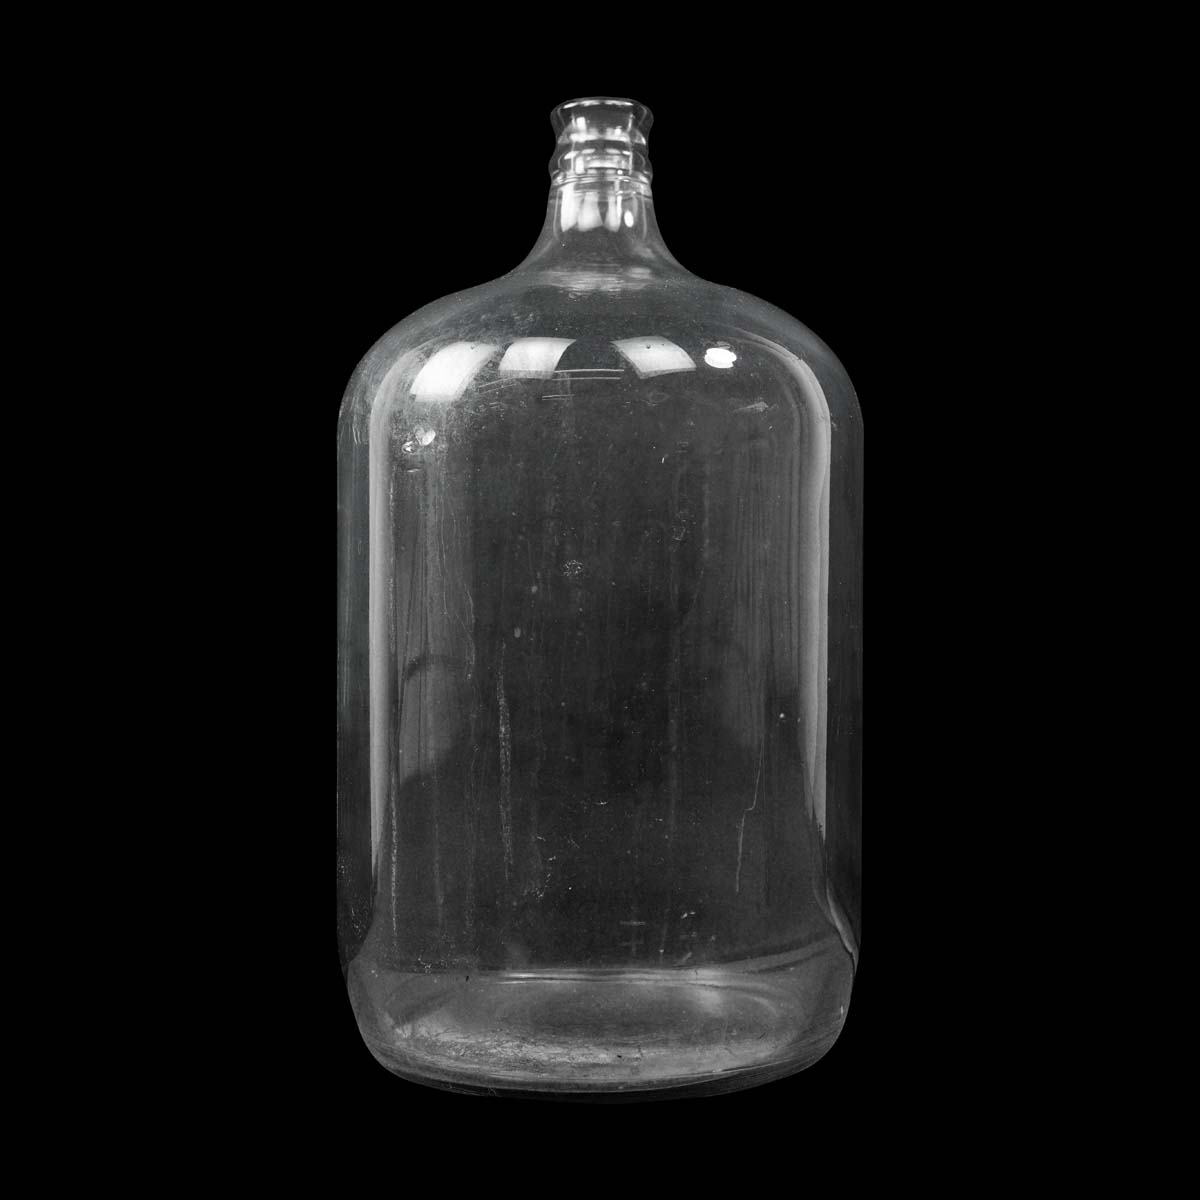 Vintage Clear Glass 5 Gallon Carboy Bottle Jug | Olde Good Things